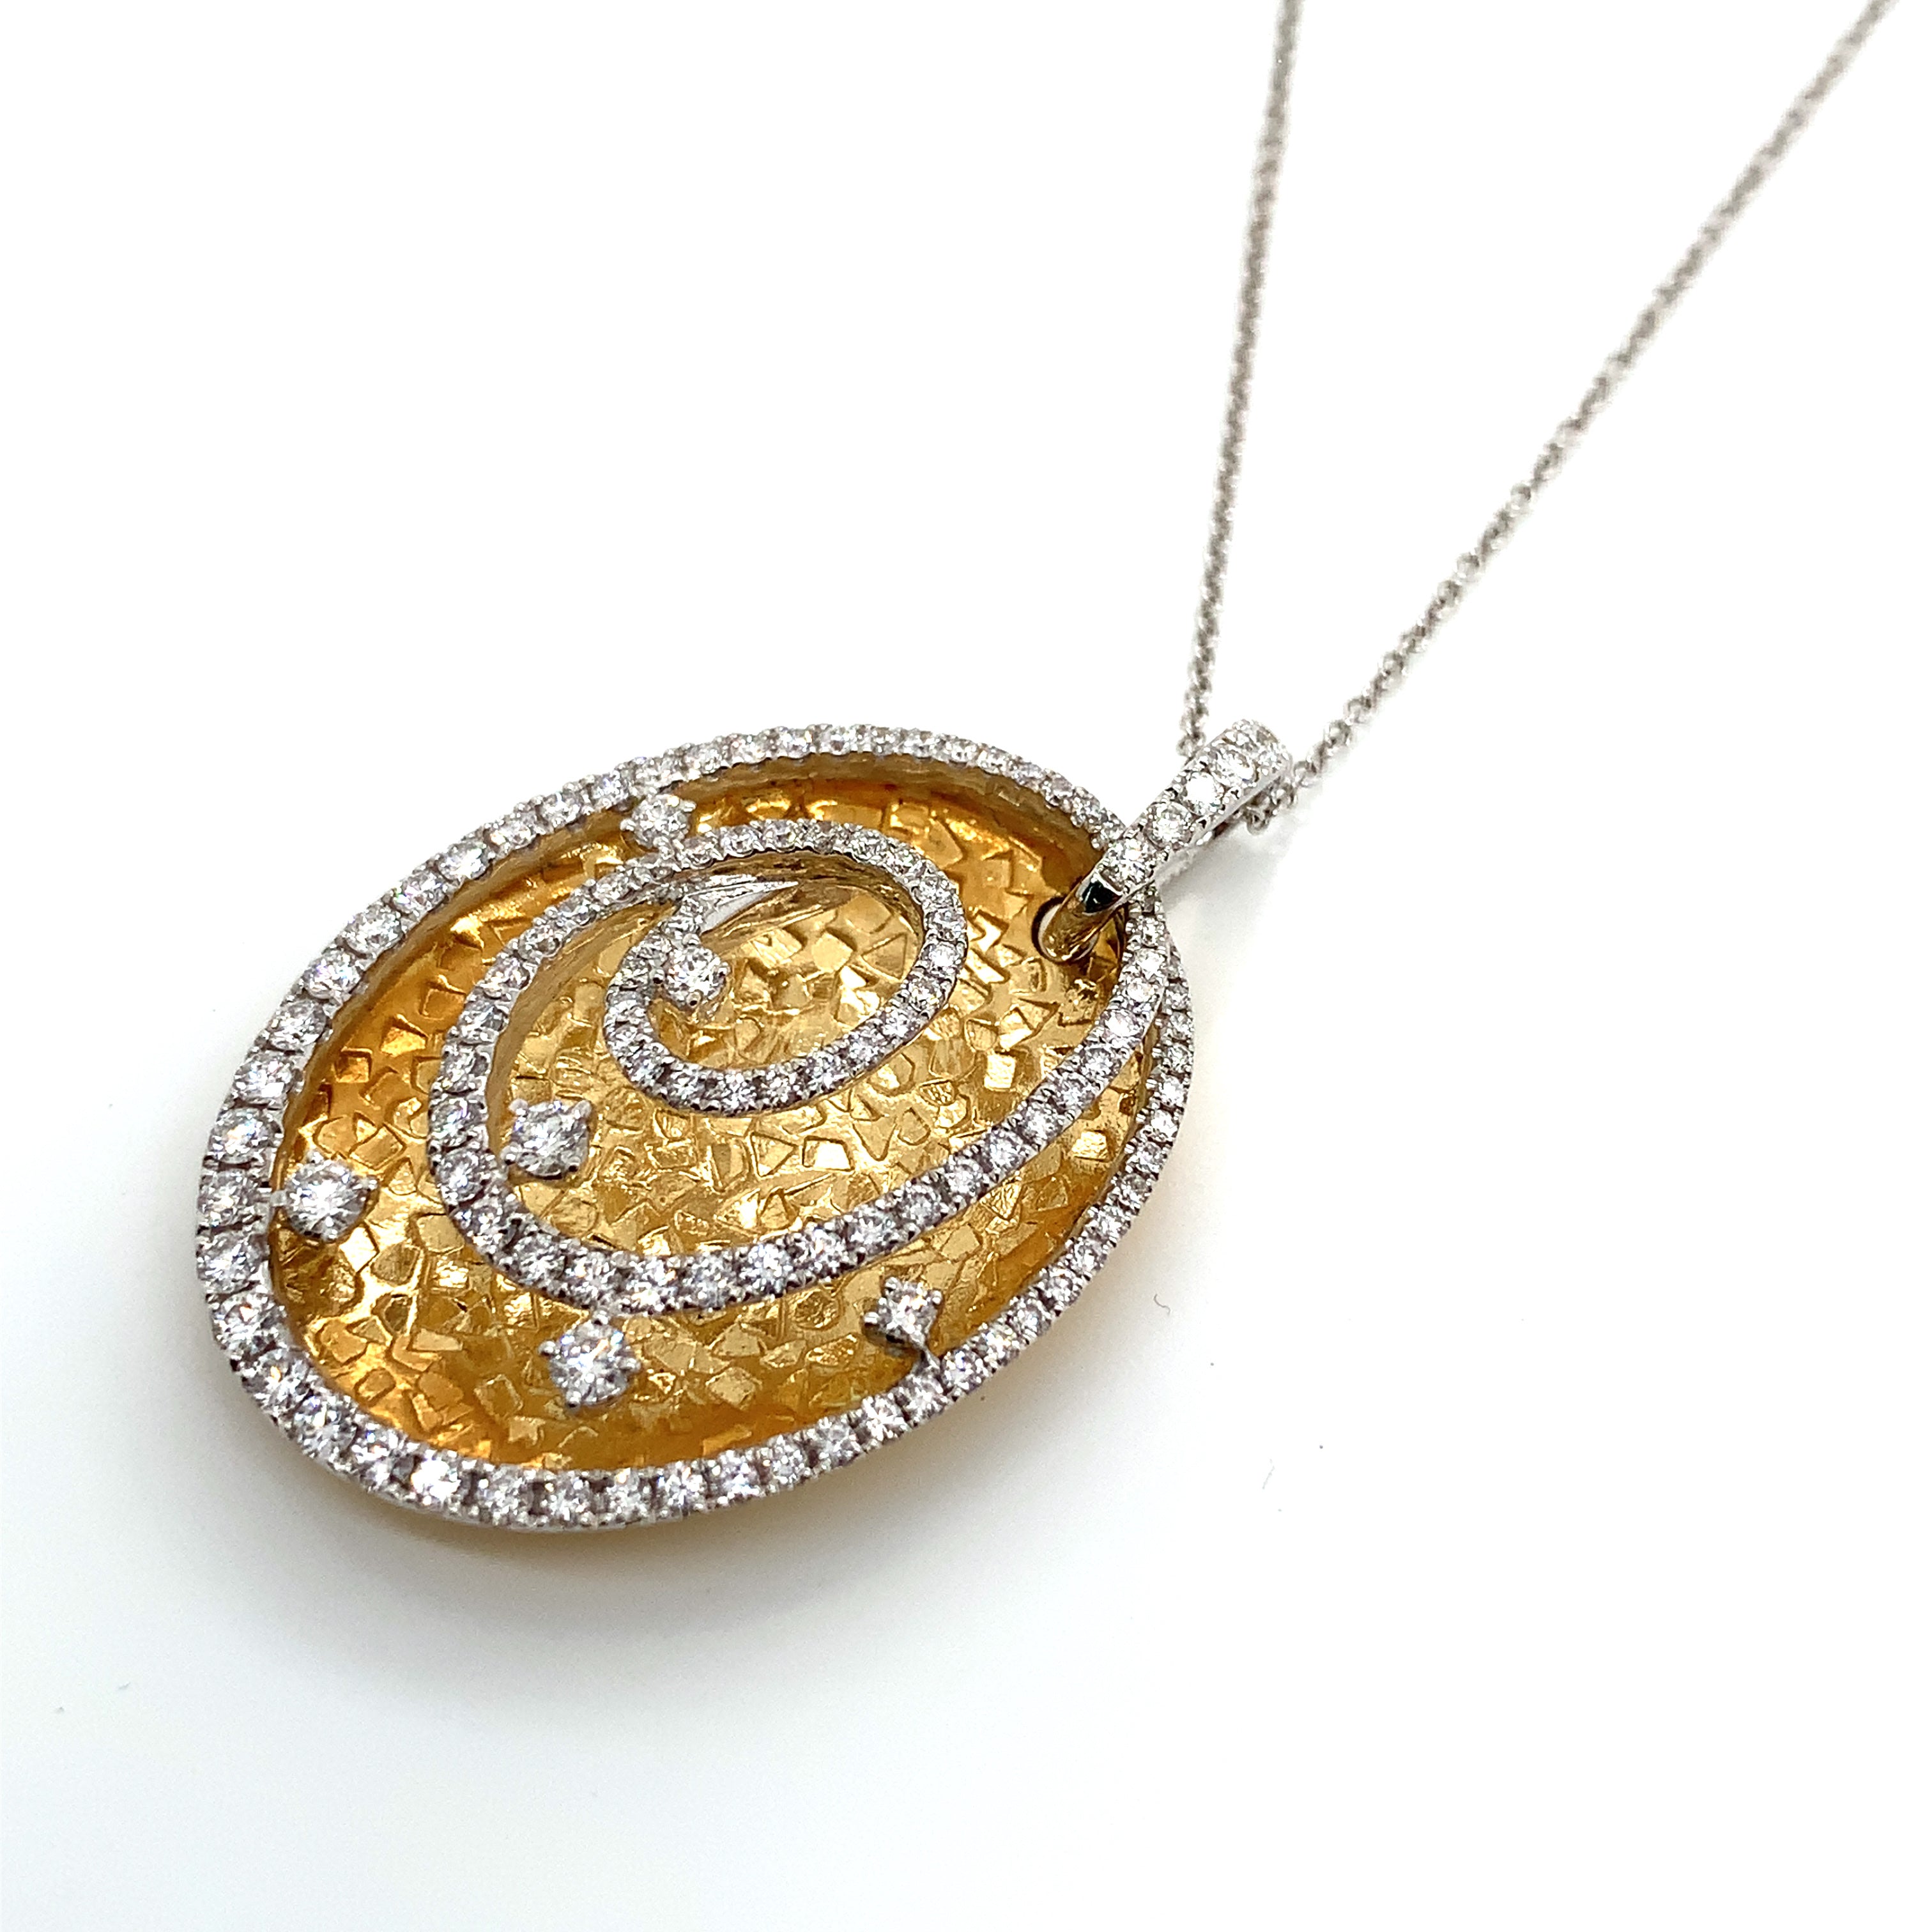 HAMMERED YELLOW GOLD PENDANT